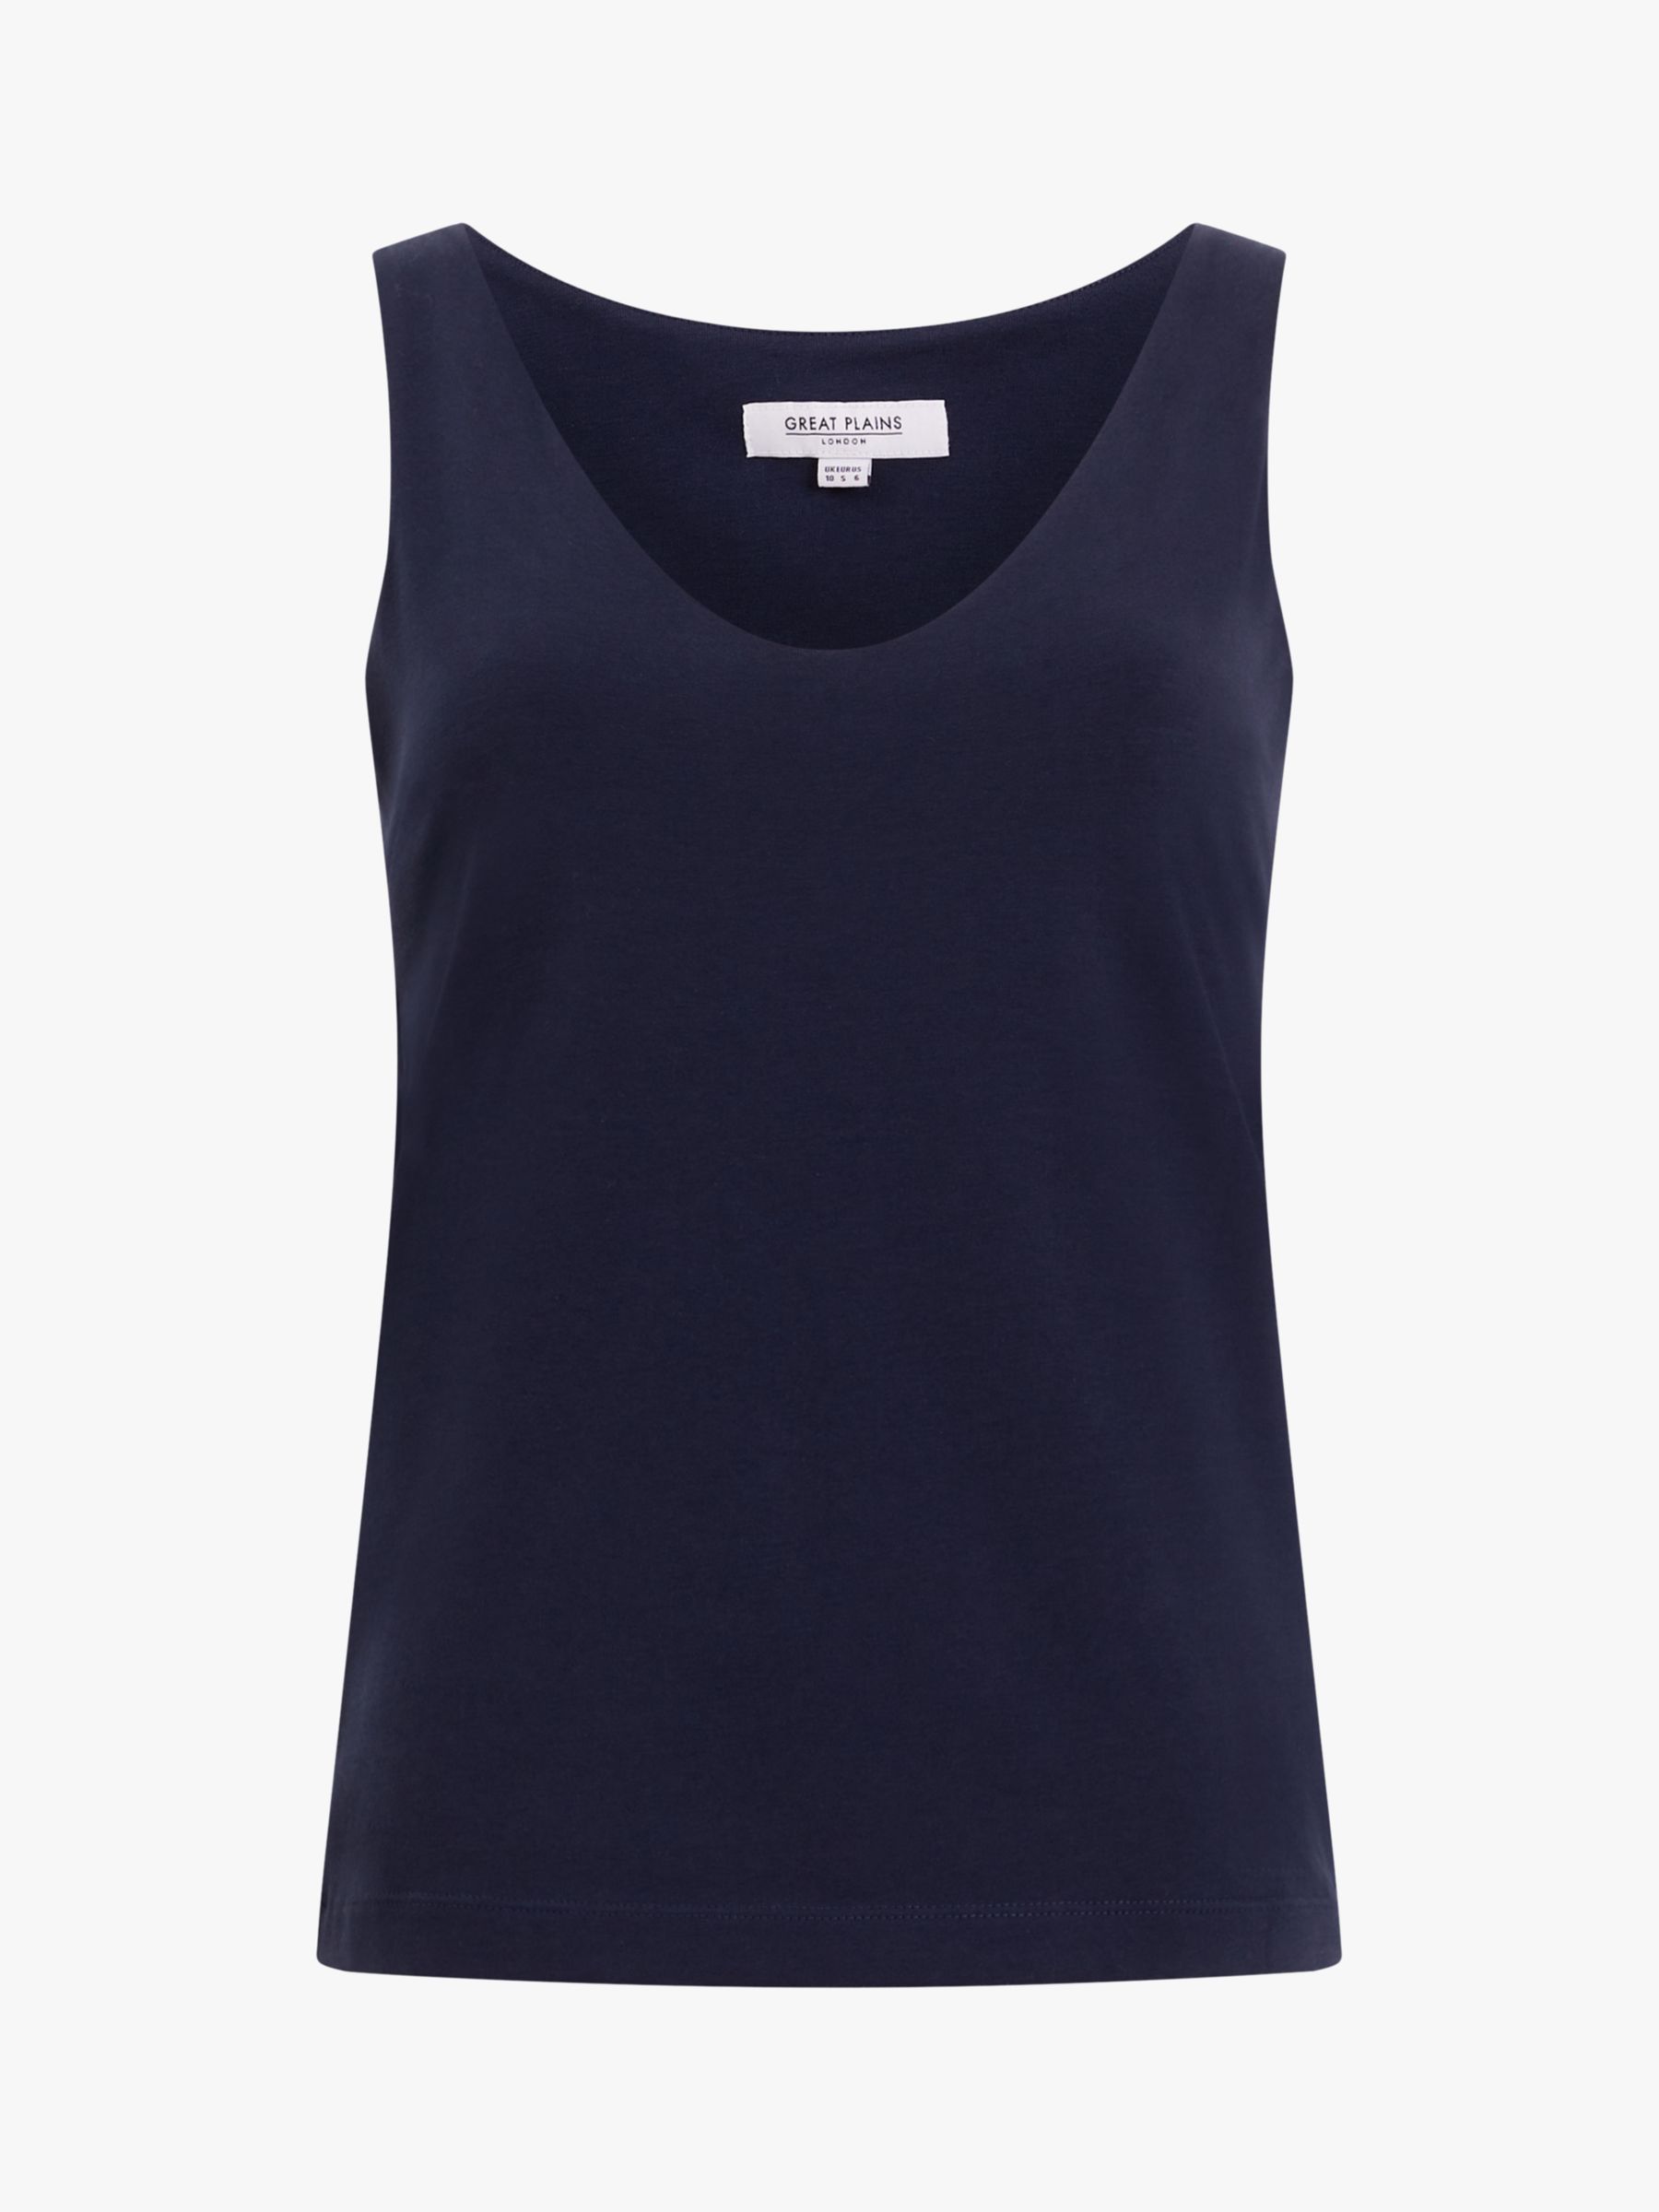 Buy Great Plains Core Organic Cotton Fitted Tank Top Online at johnlewis.com